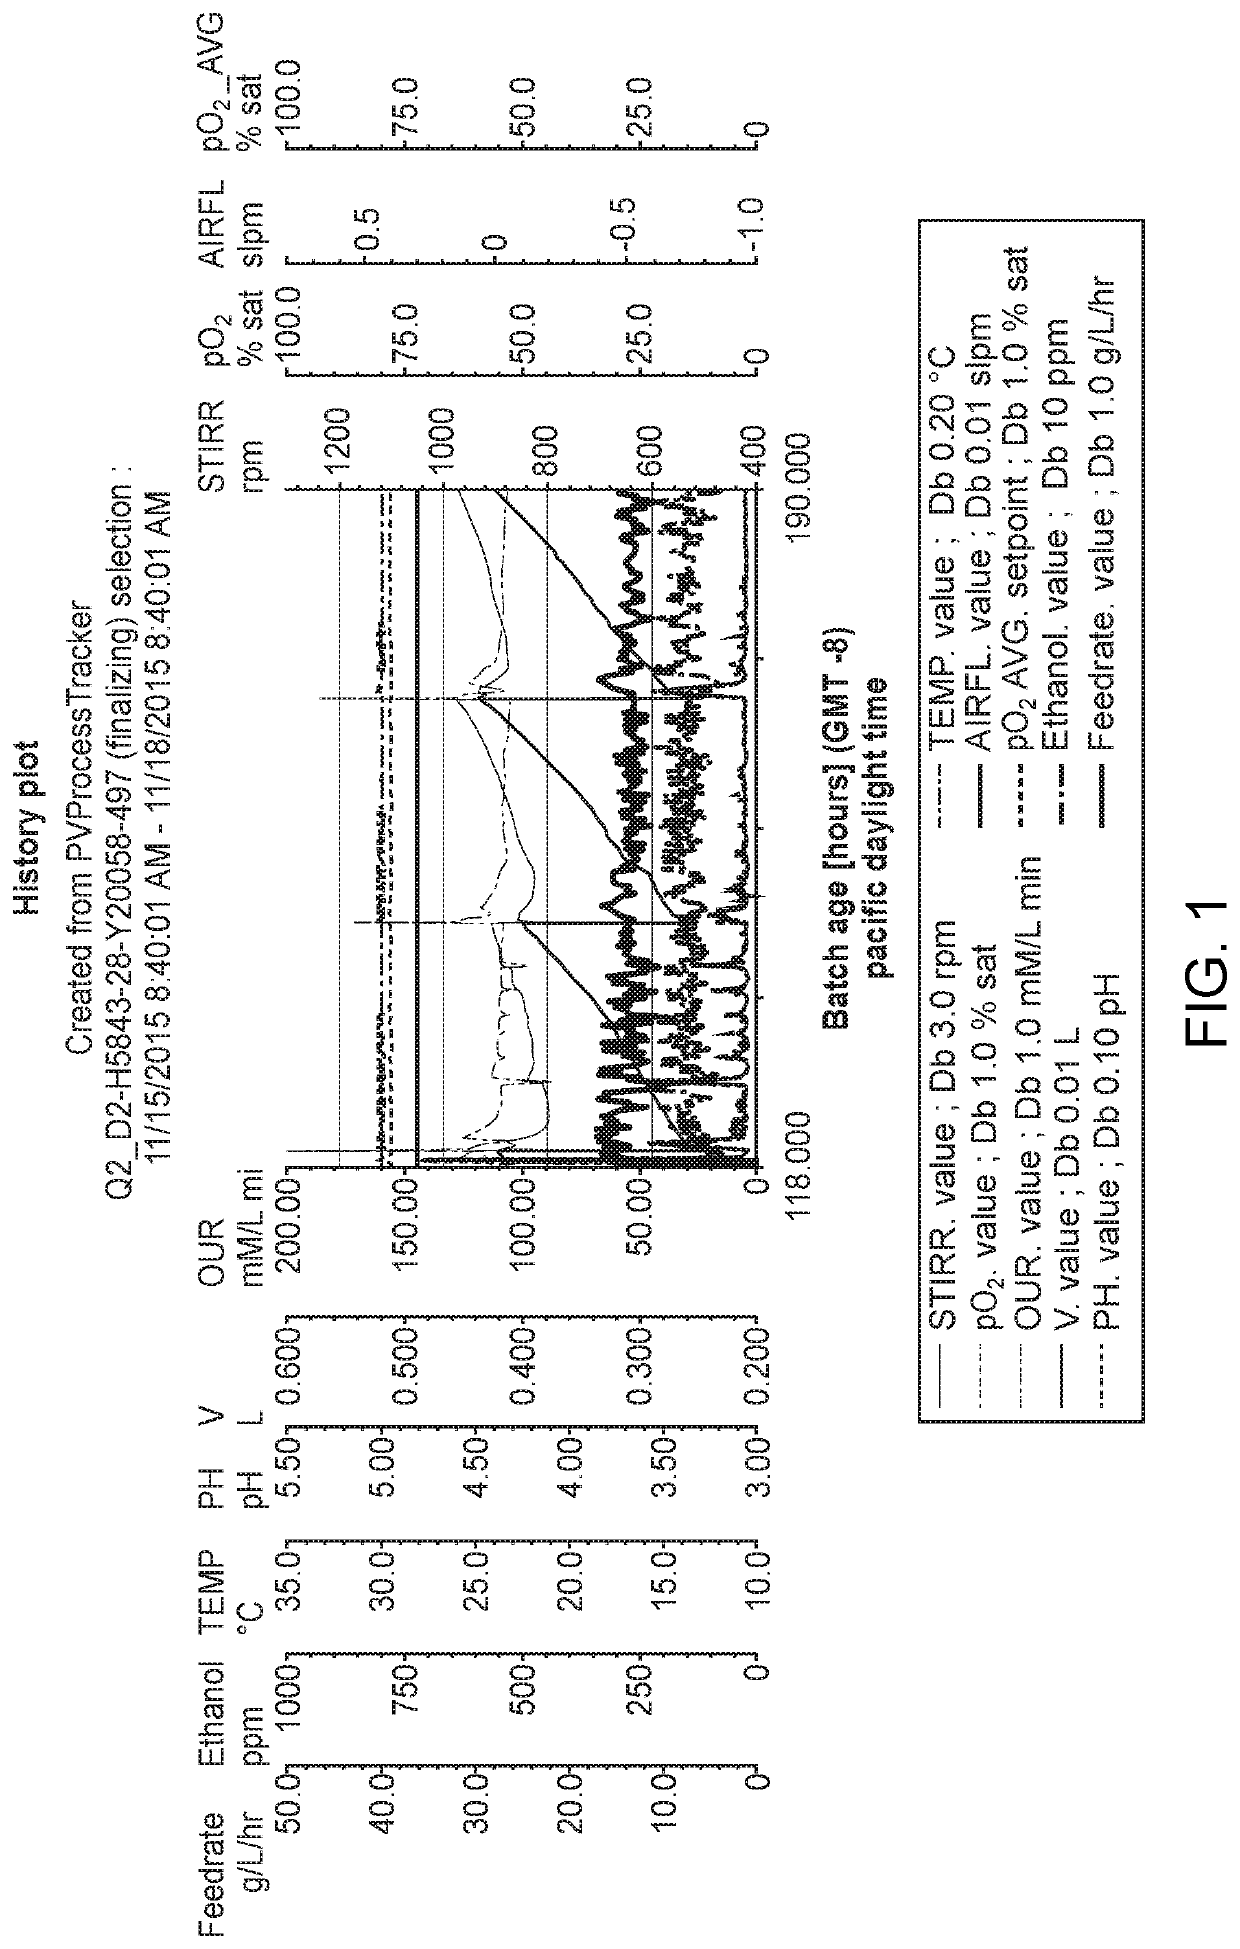 Methods for controlling fermentation feed rates